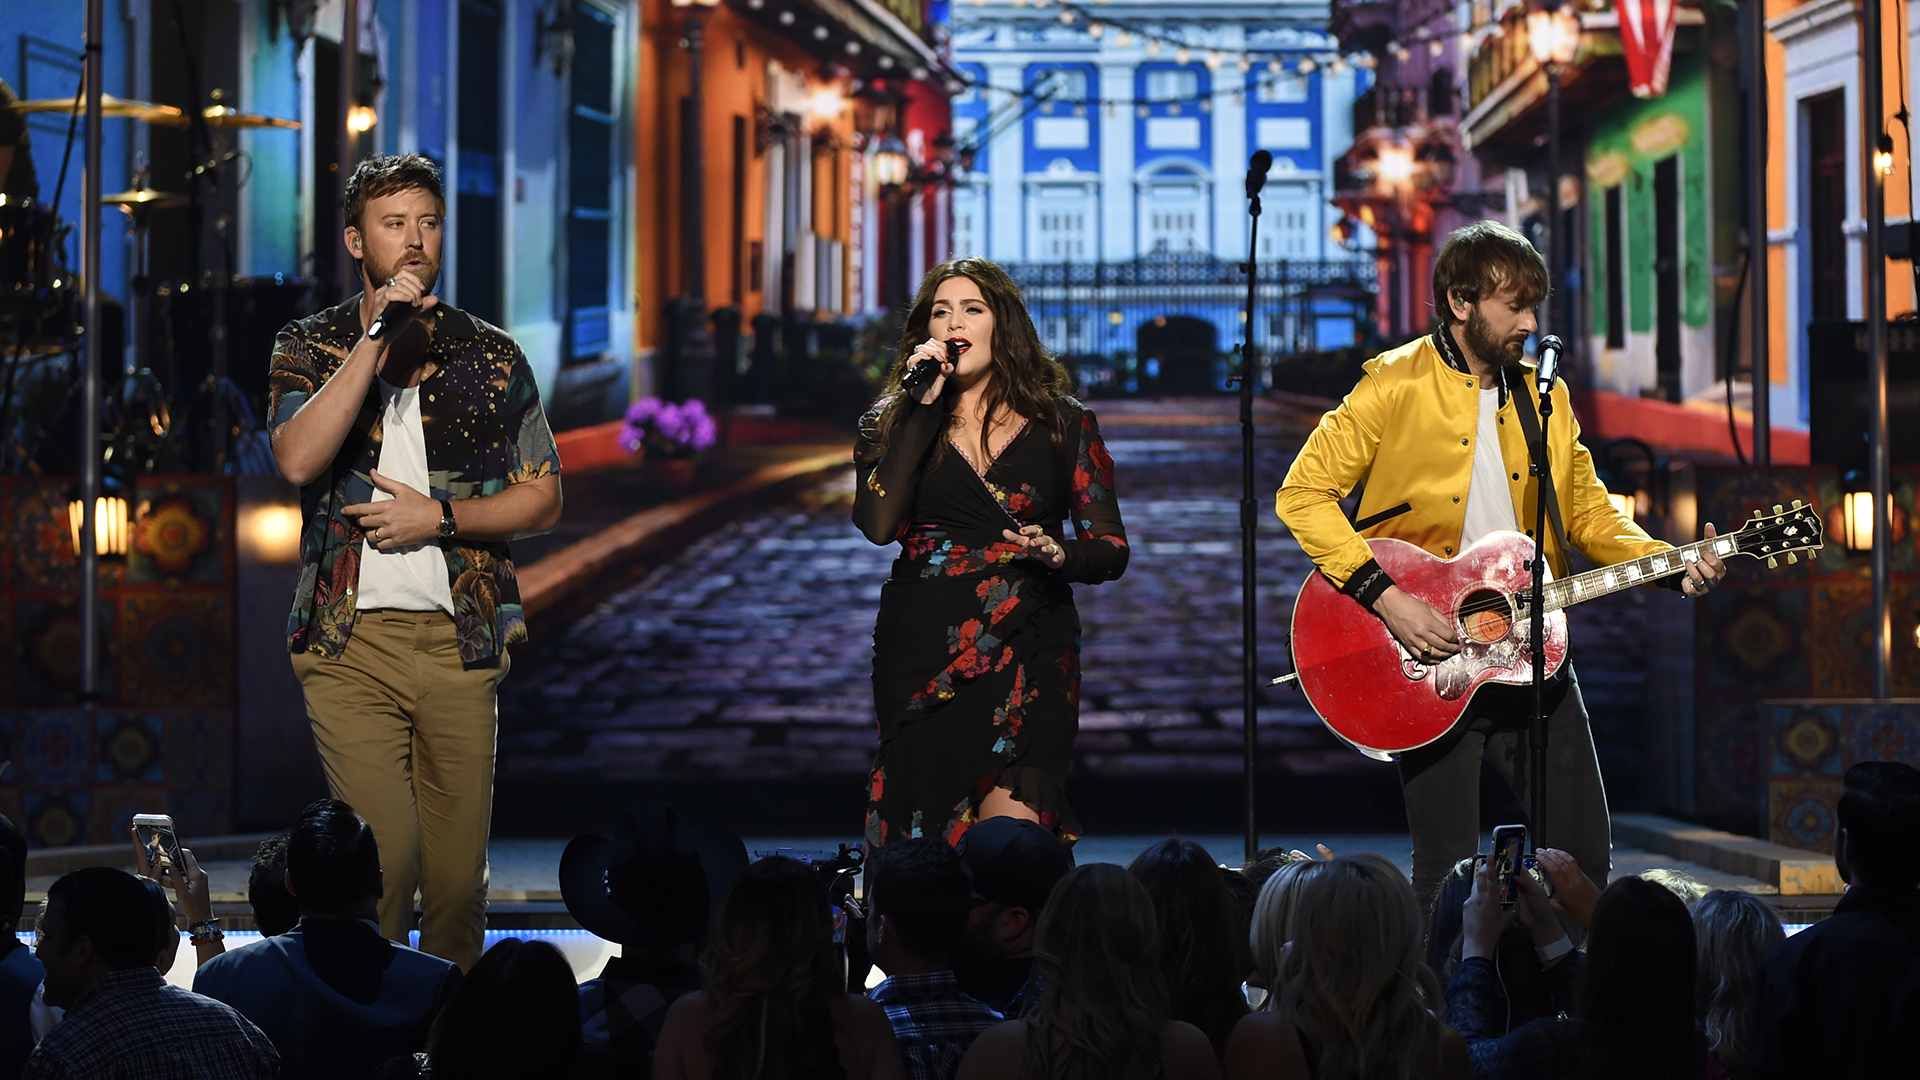 Lady Antebellum plays one of their latest singles, 